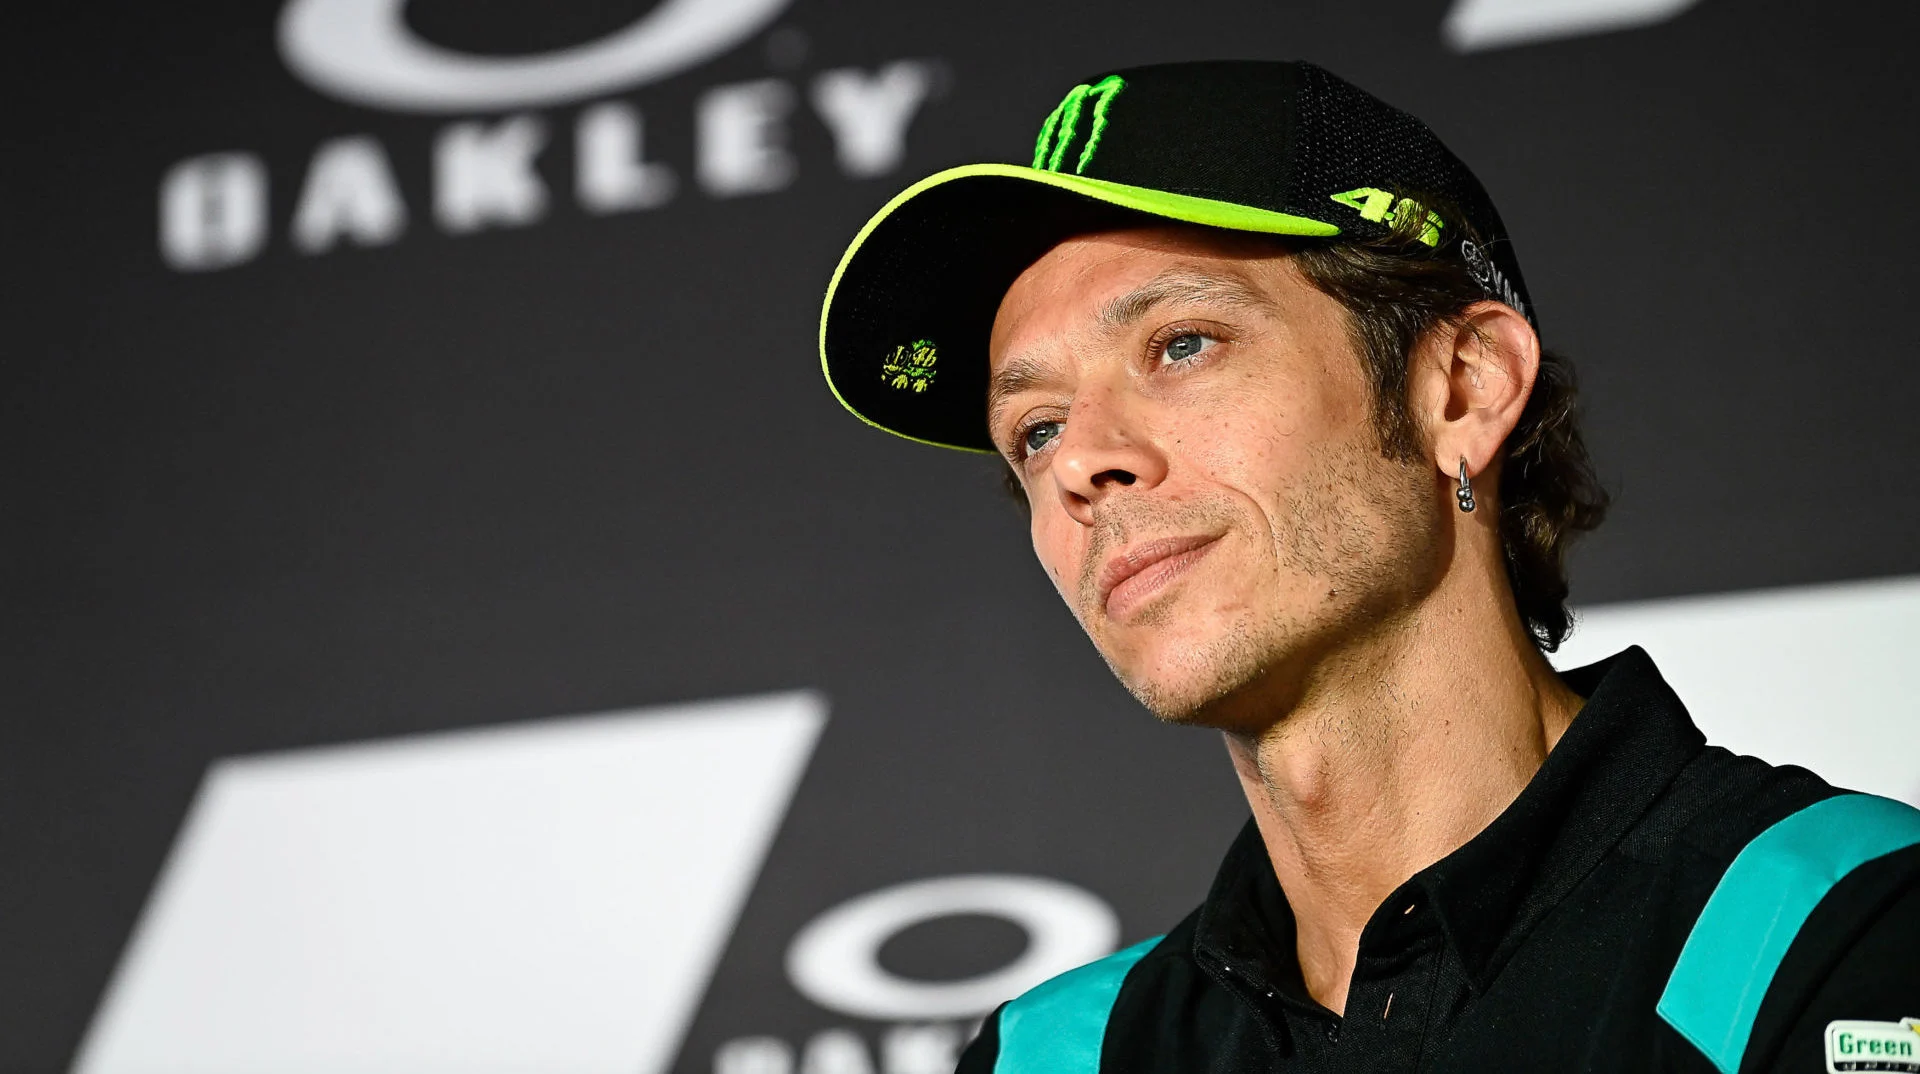 SAD NEWS: An Italian former professional motorcycle road racer and nine-time Grand Prix world champion  Valentino Rossi Announces a sudden… see more